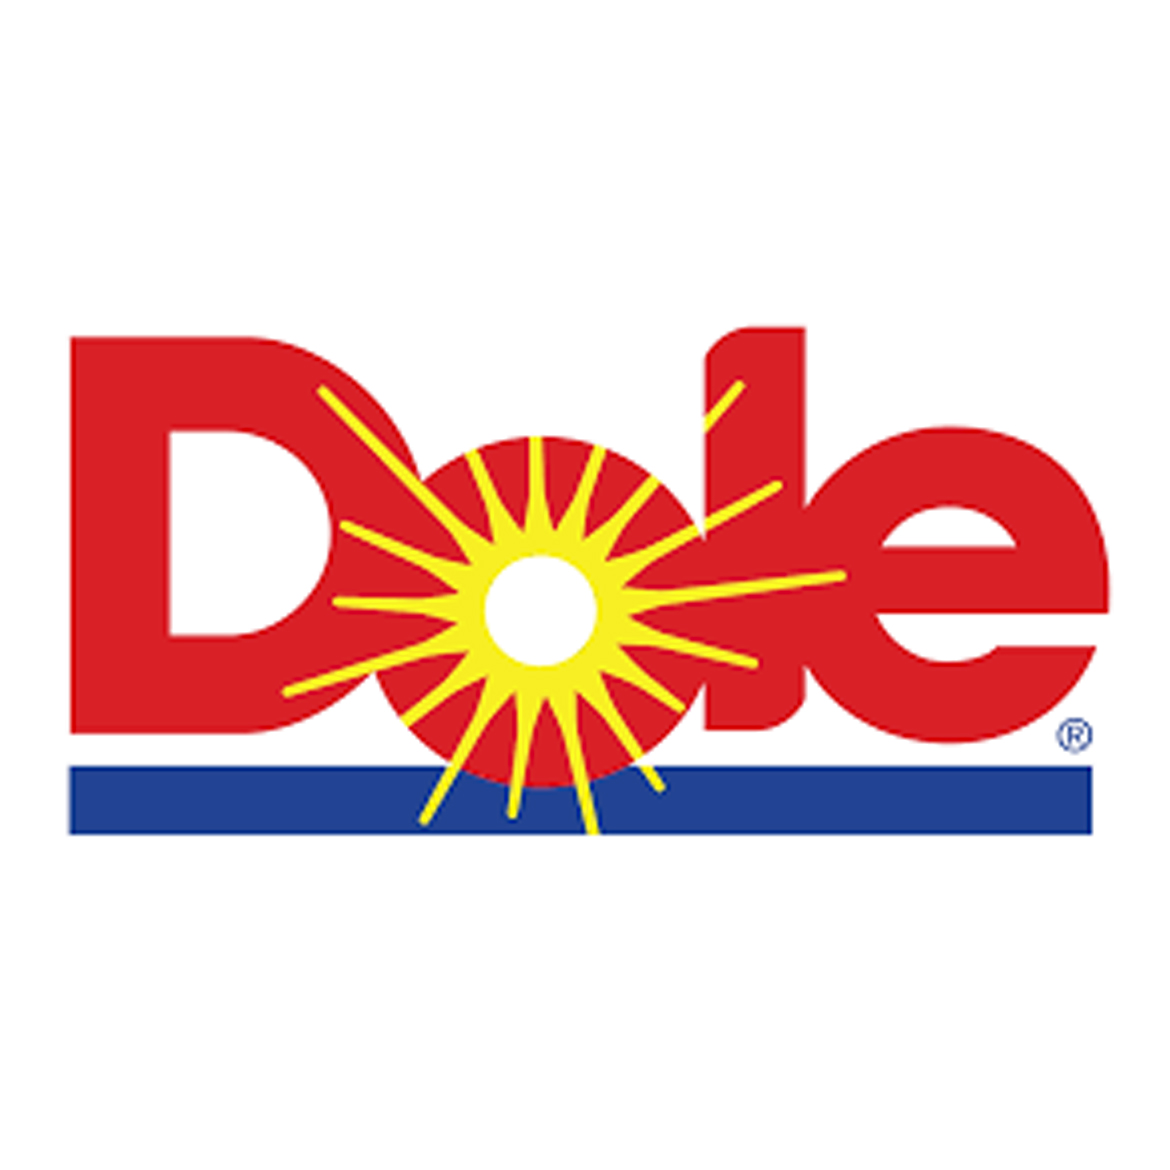 http://www.hoivend.com/img/projects/products/beverage/dole.jpg